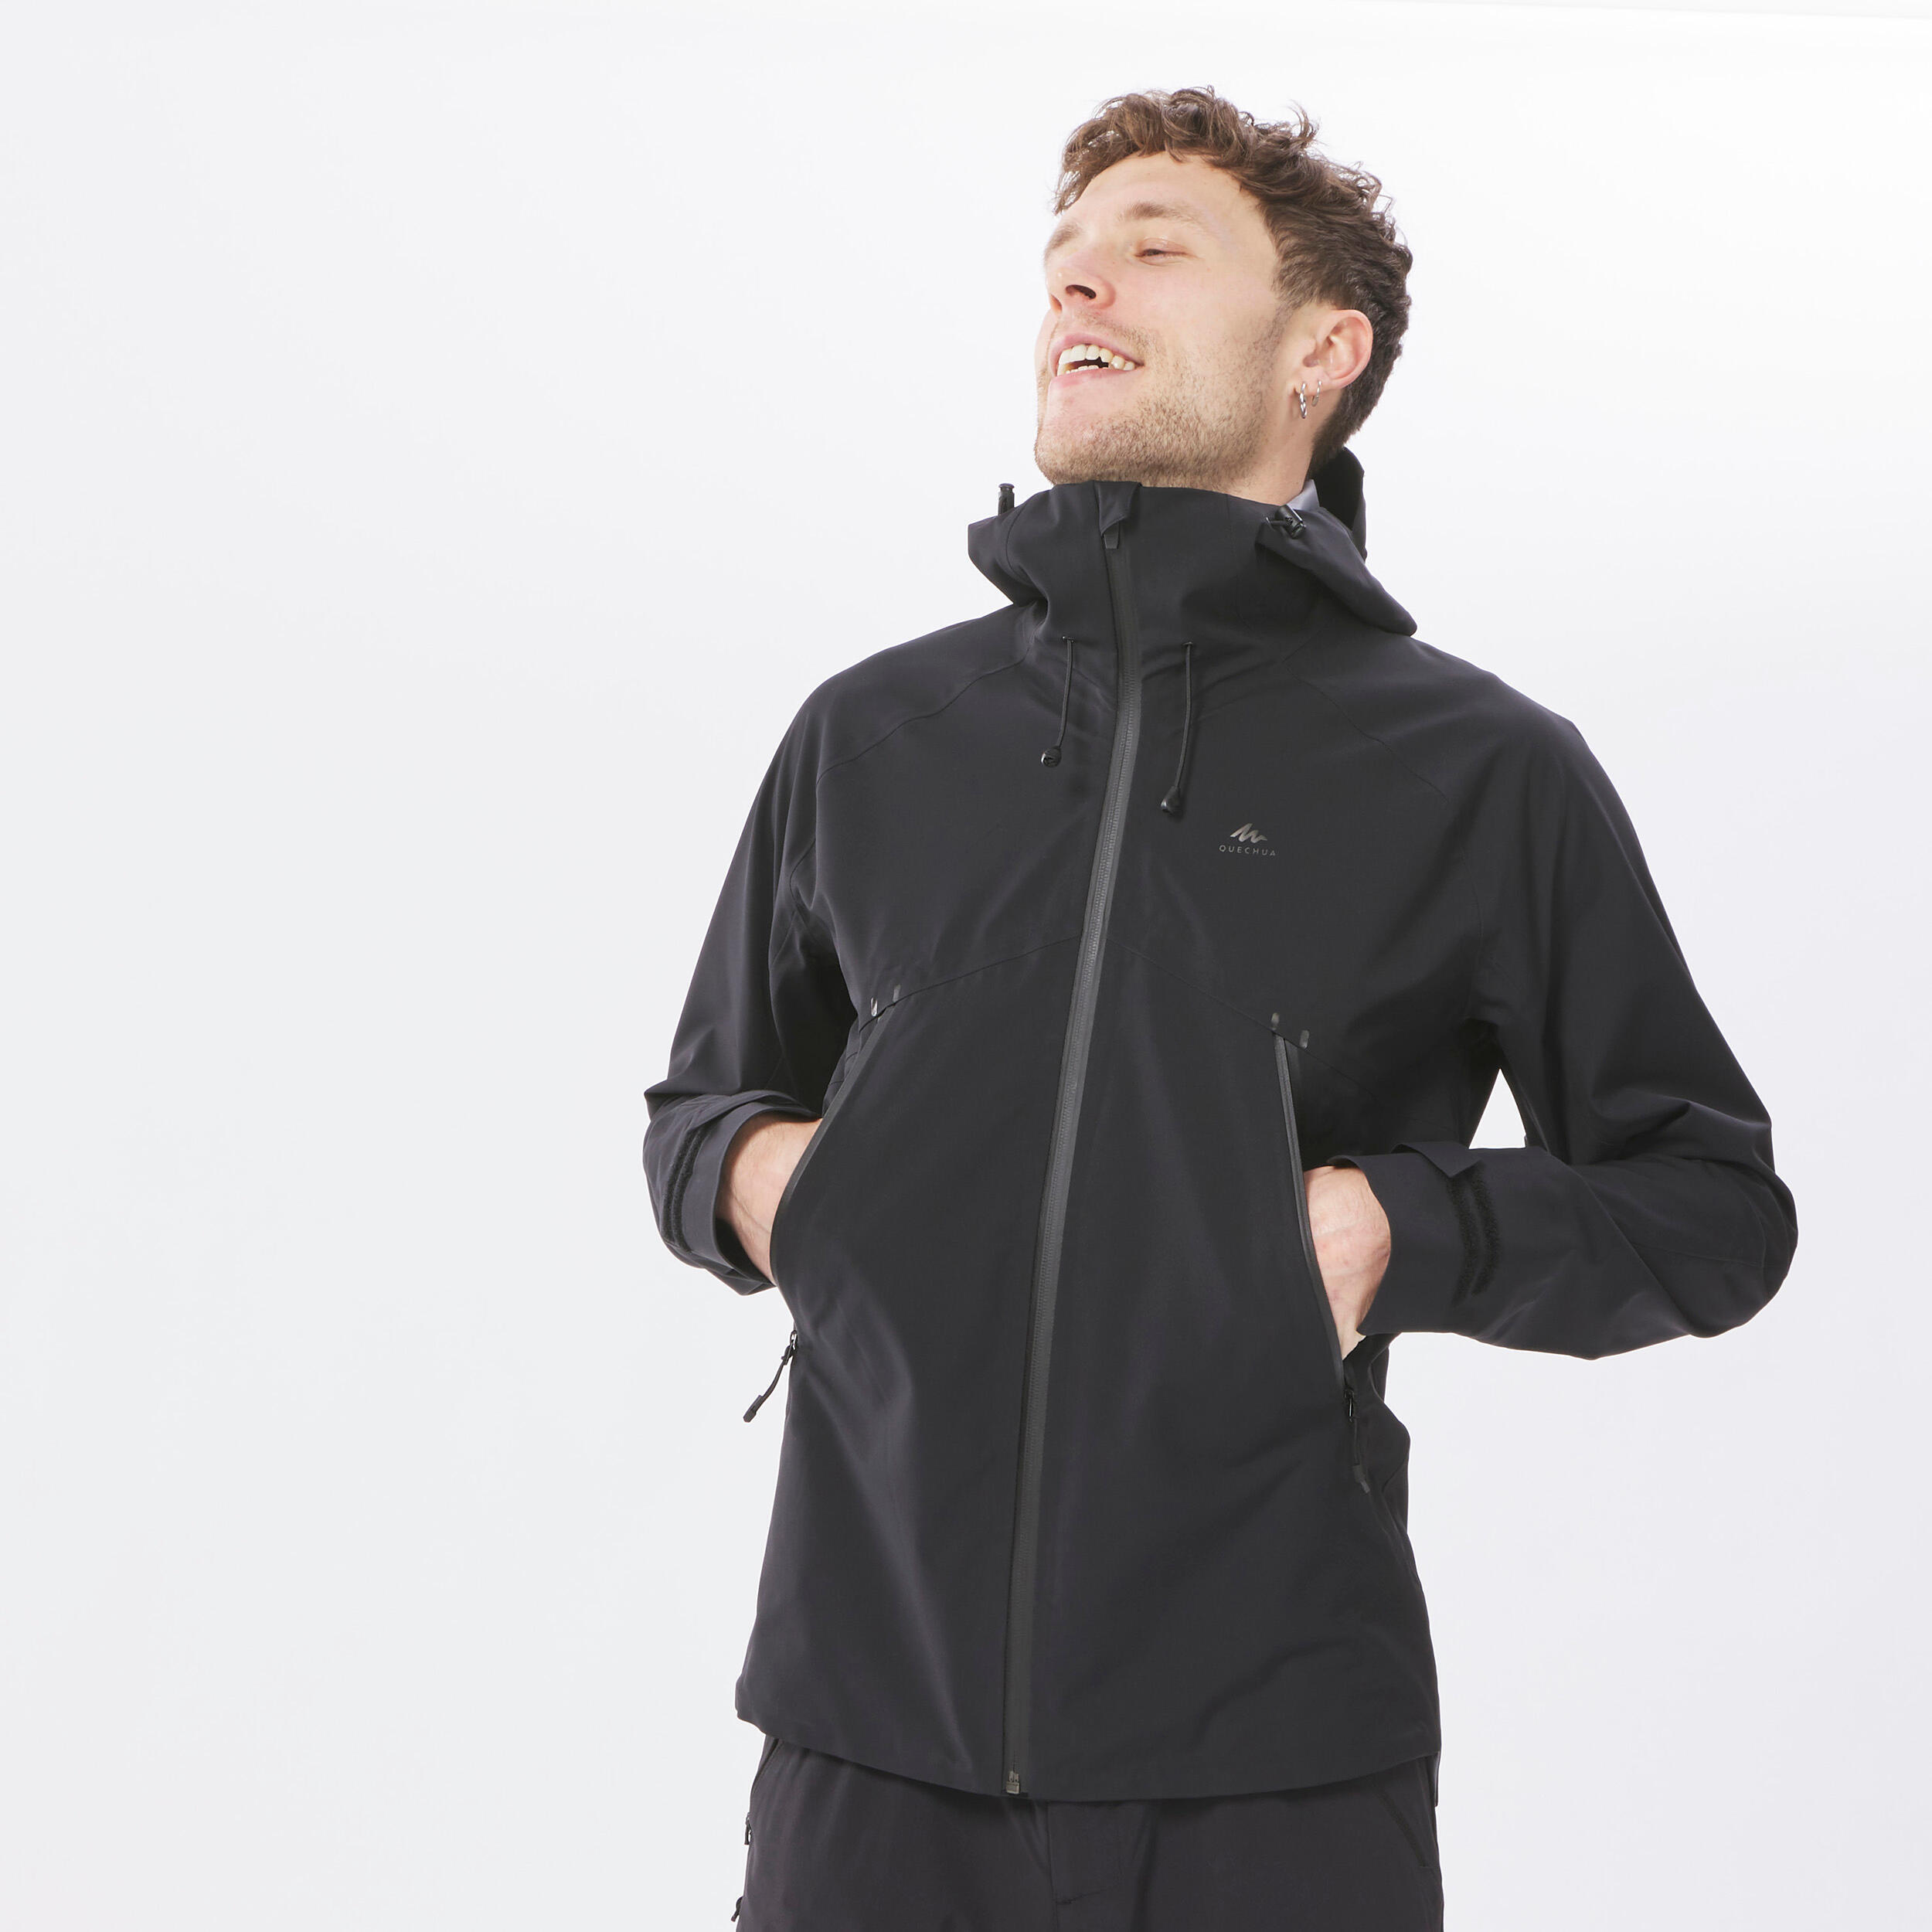 Unlock Wilderness' choice in the Decathlon Vs Patagonia comparison, the MH500 Waterproof Jacket by Decathlon